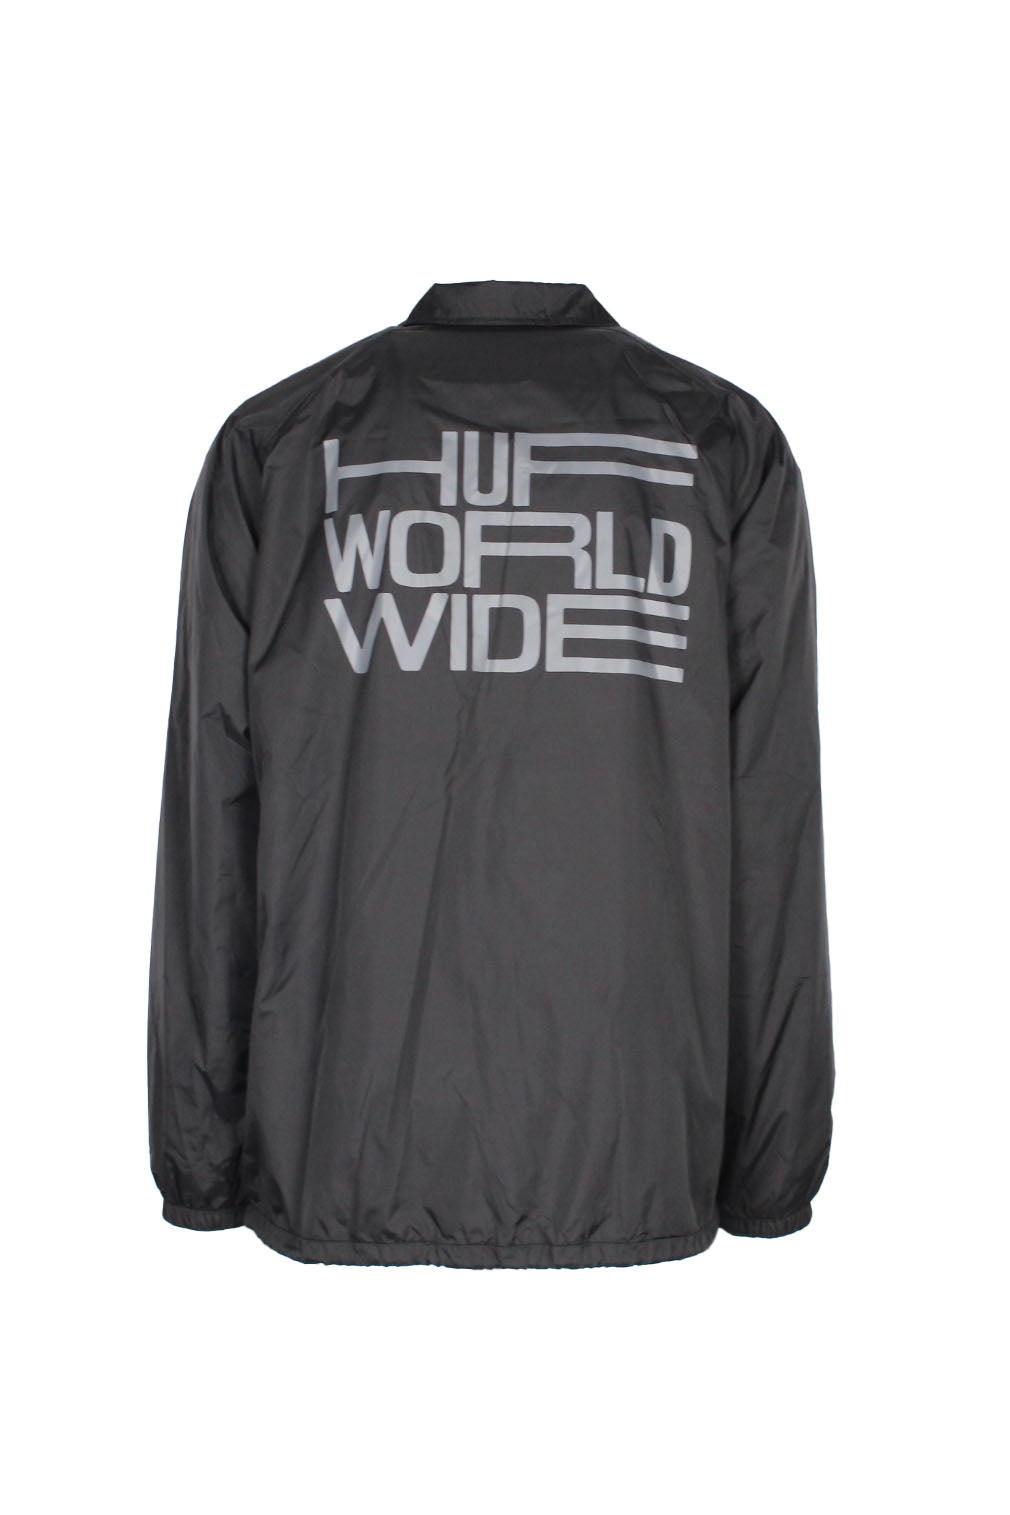 rear view with 'huf world wide' graphic printed at back of jacket.